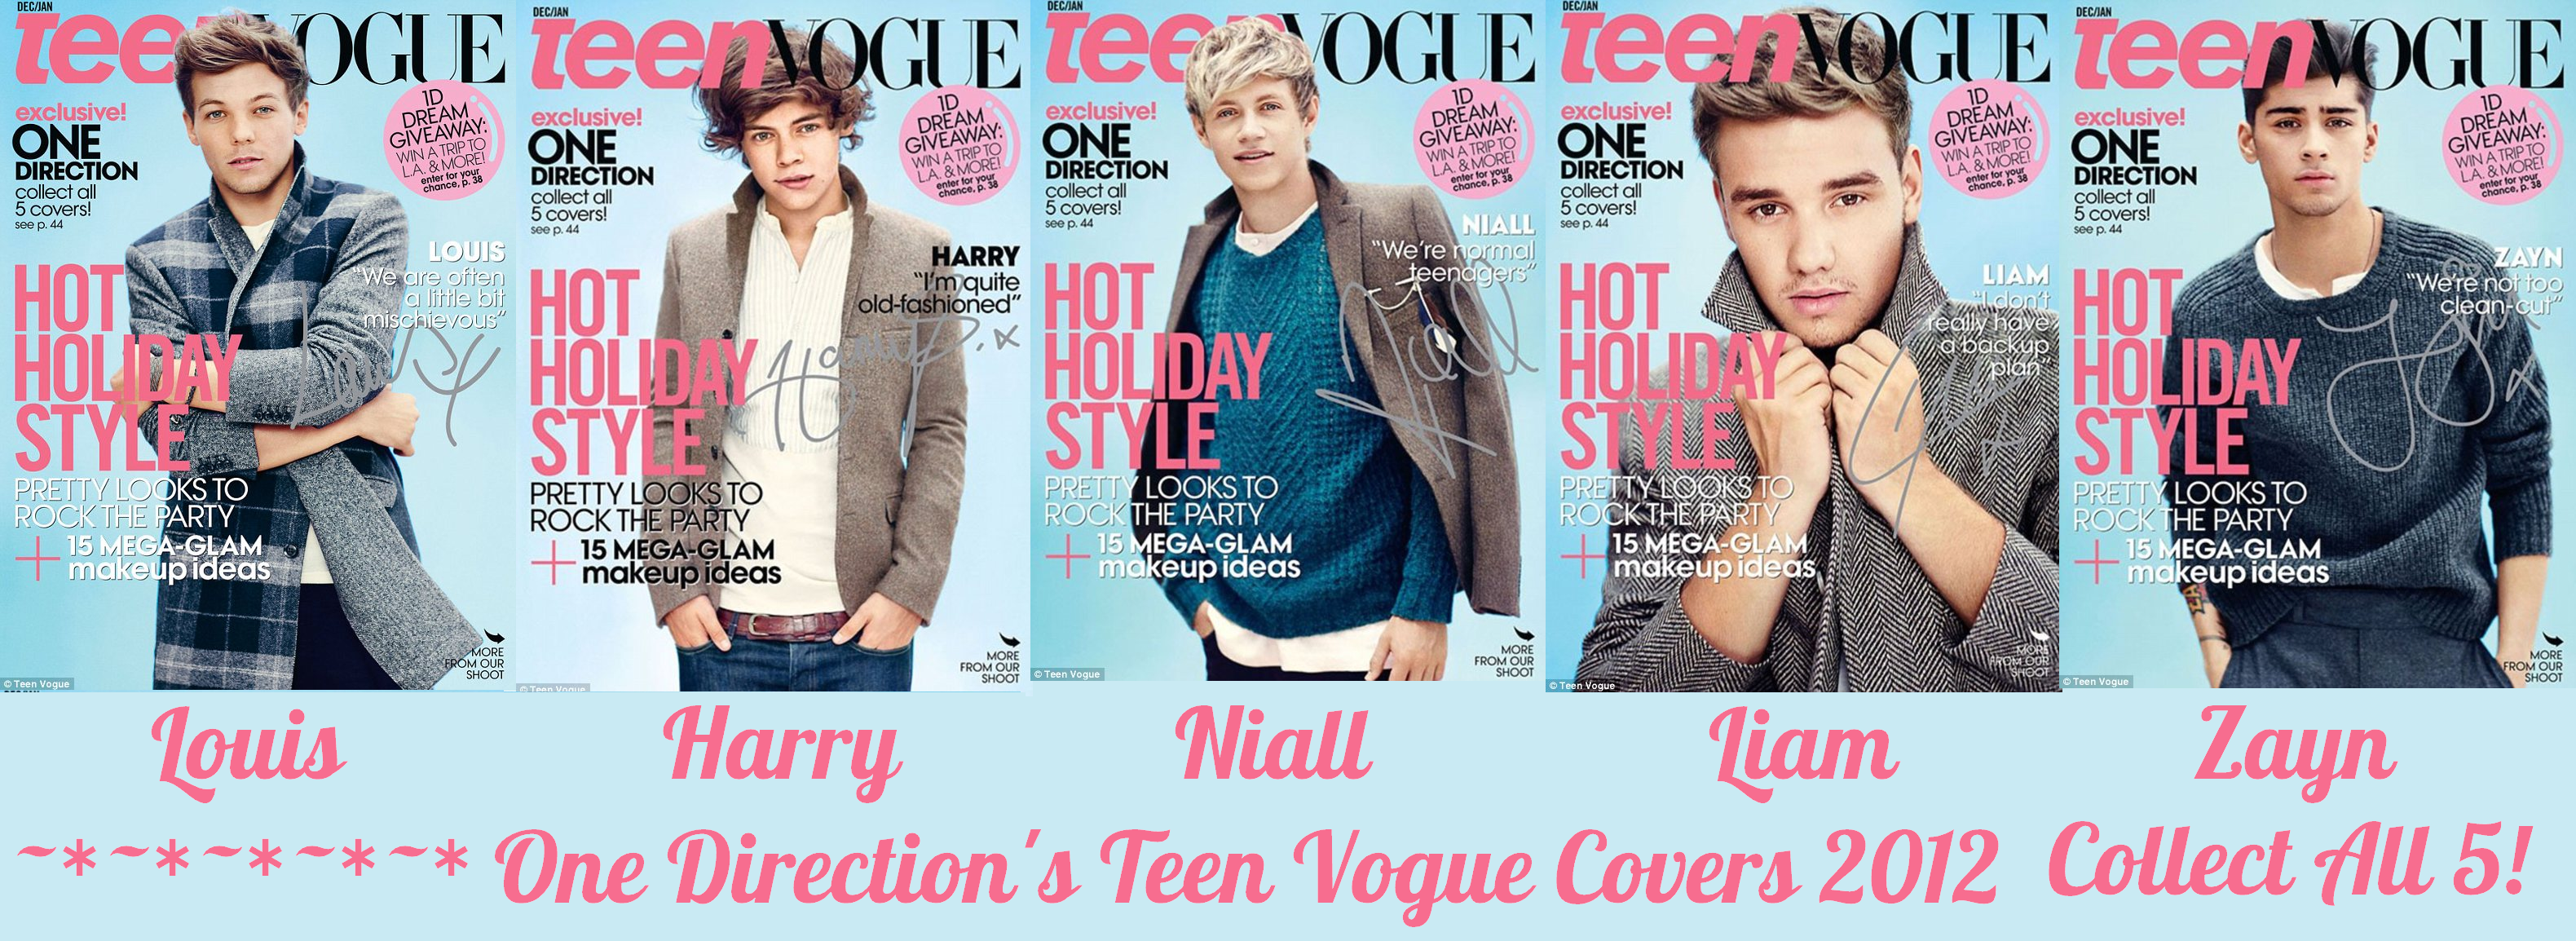 One Direction Teen Vogue Covers 2012 by iluvlouis on DeviantArt